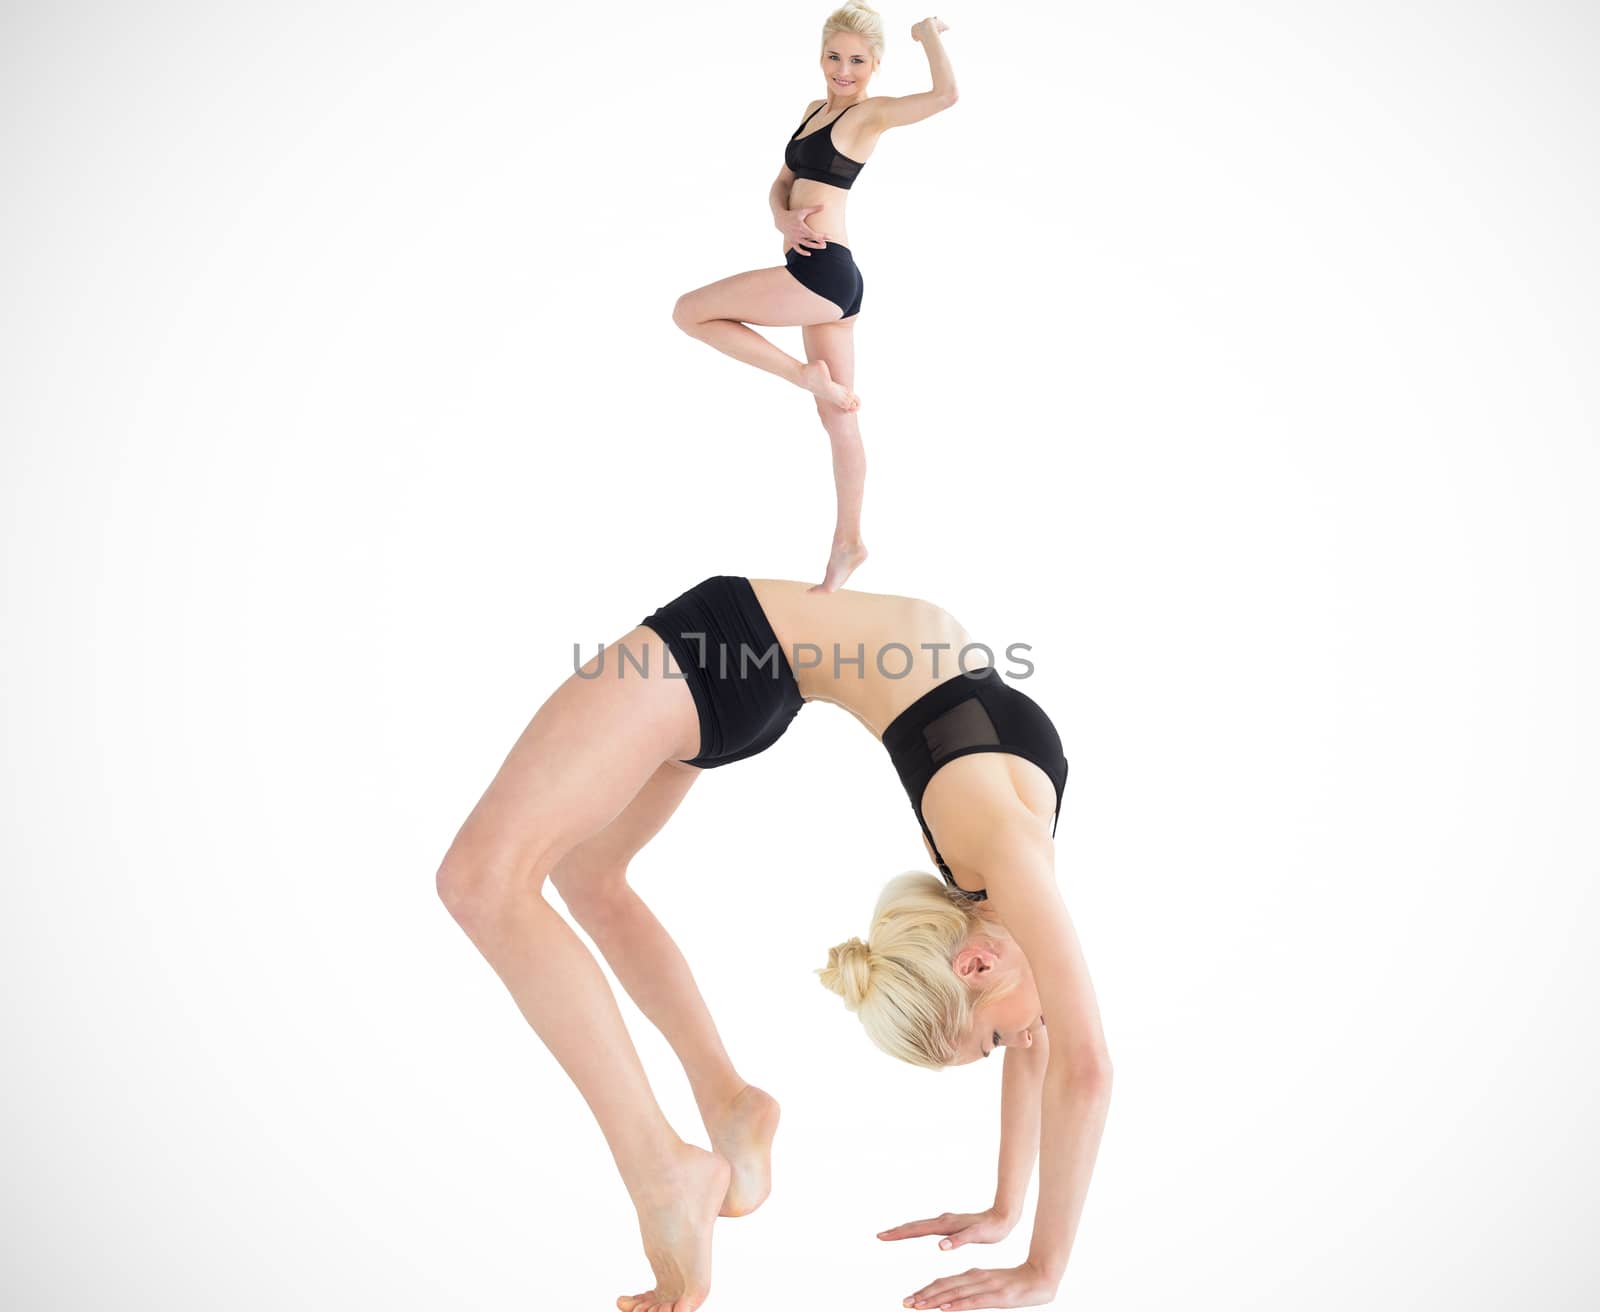 Composite image of side view of a fit young woman doing the wheel pose